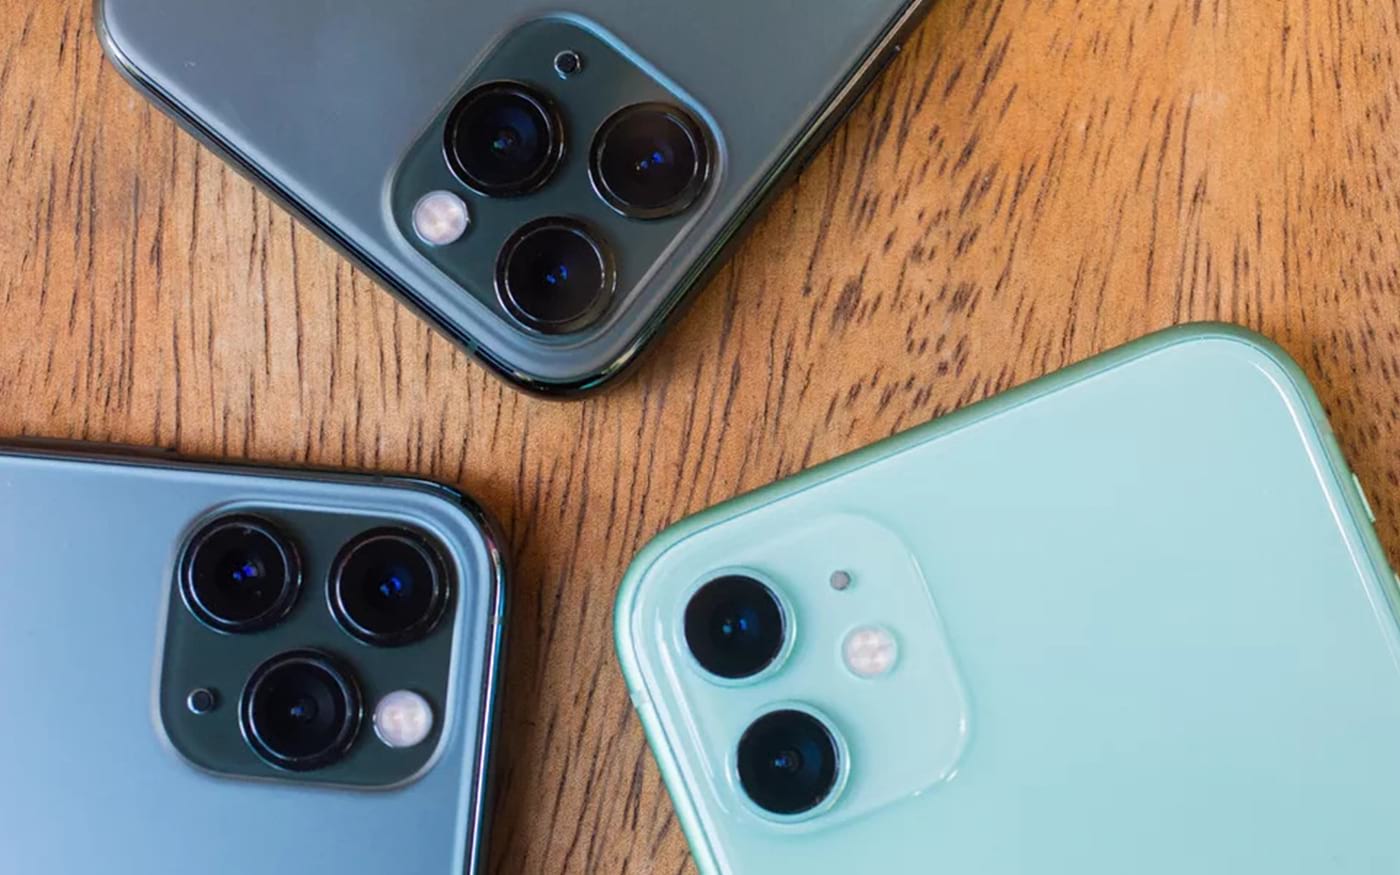 Apple sold 70.7 million iPhones in the fourth quarter of 2019